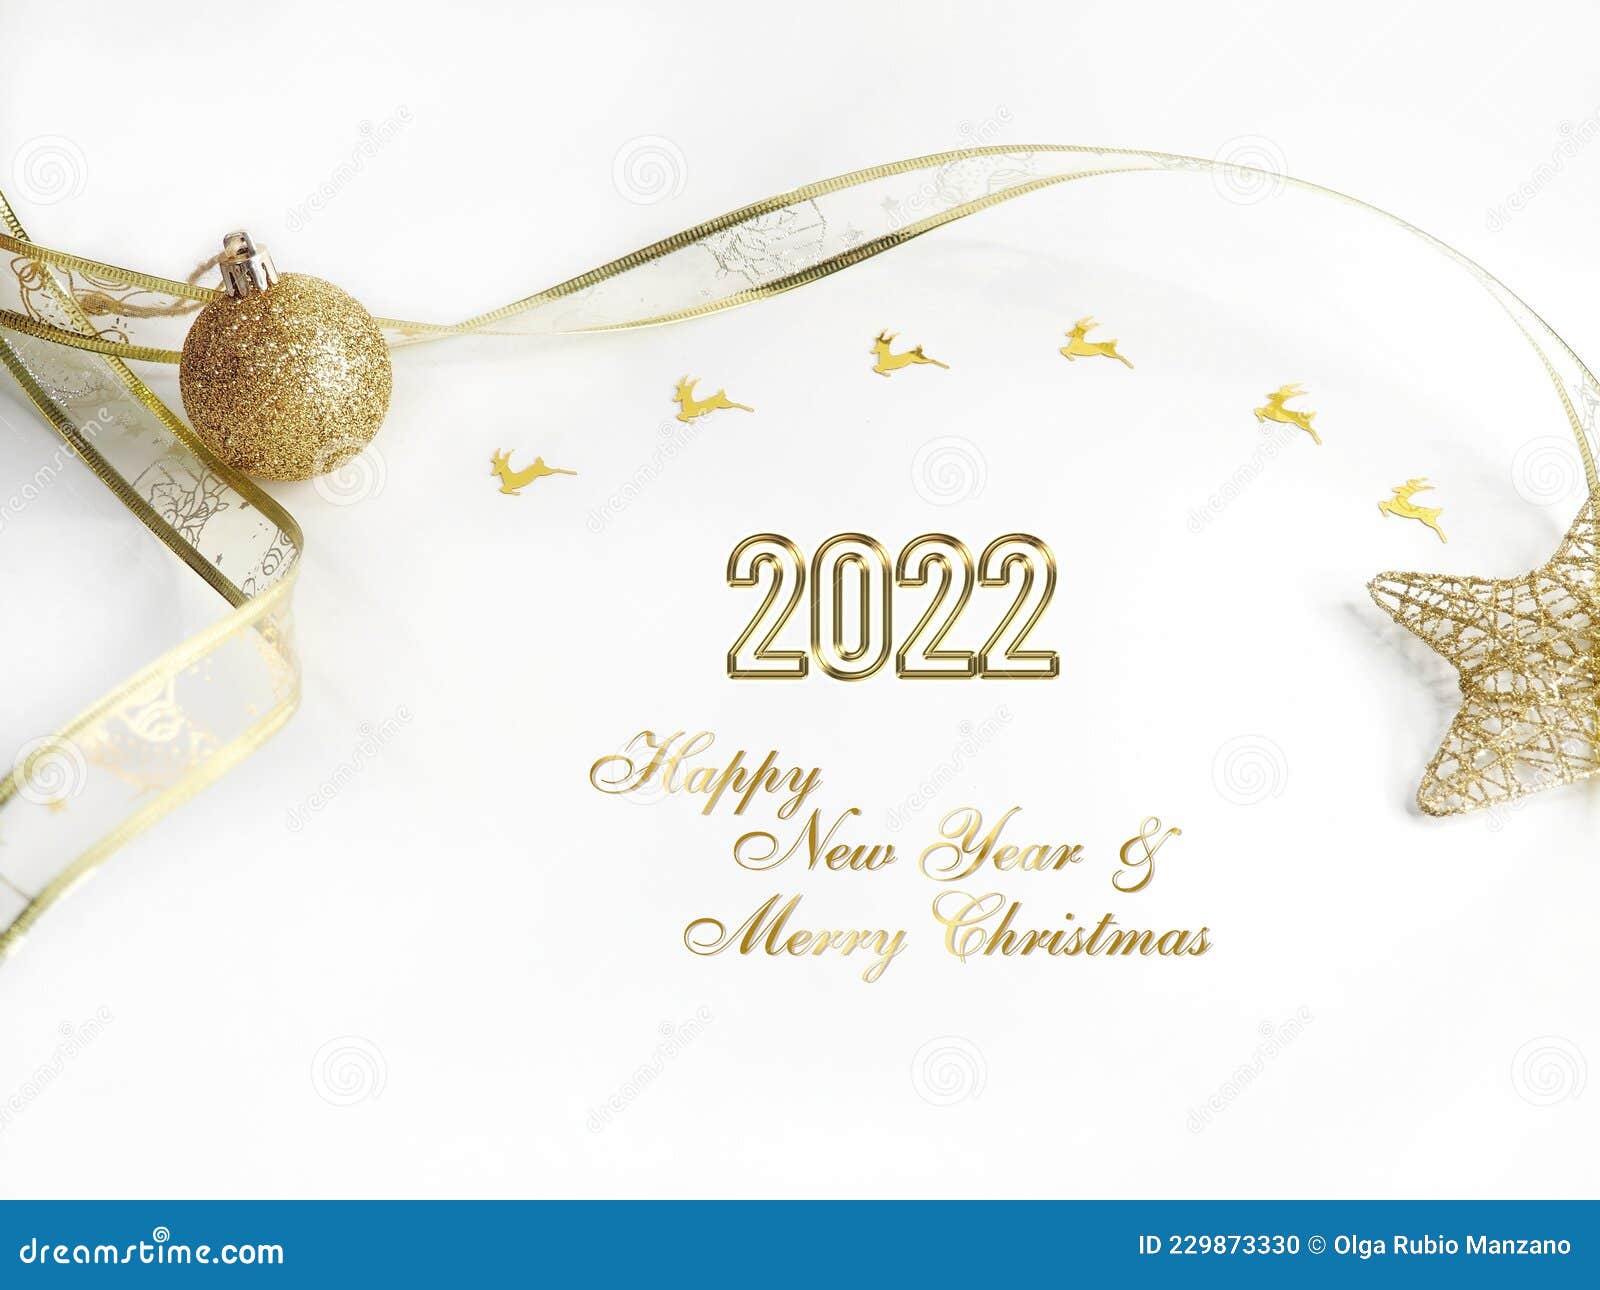 Merry Christmas and Happy New Year 2022 Greeting Card on White ...